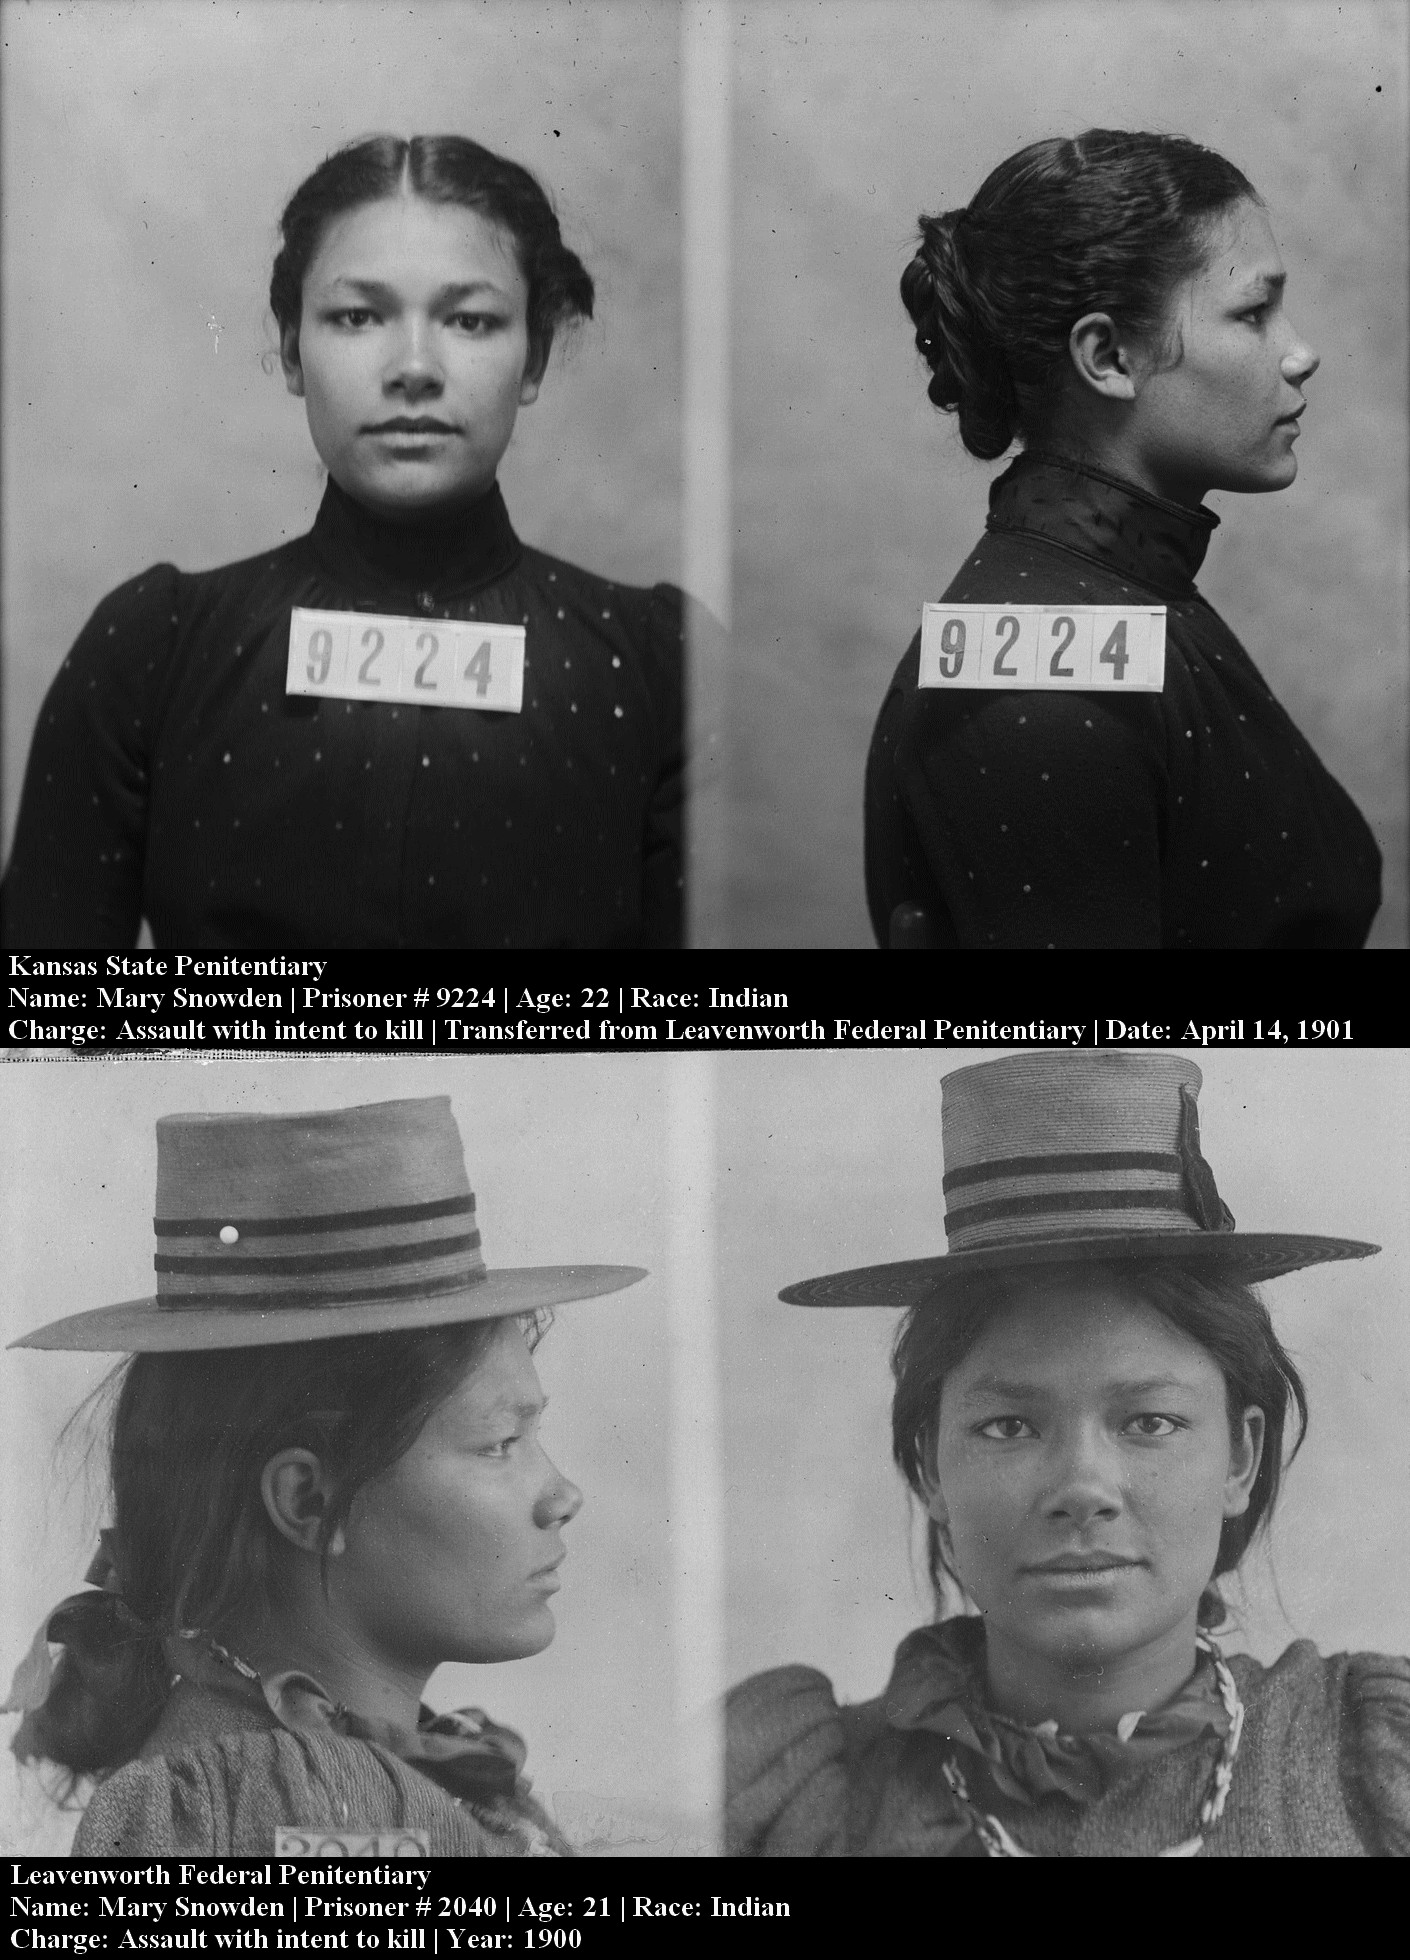 Prisoner at Leavenworth Federal Penitentiary couldn't evade the law even with that cute lil hat, circa 1900s. 